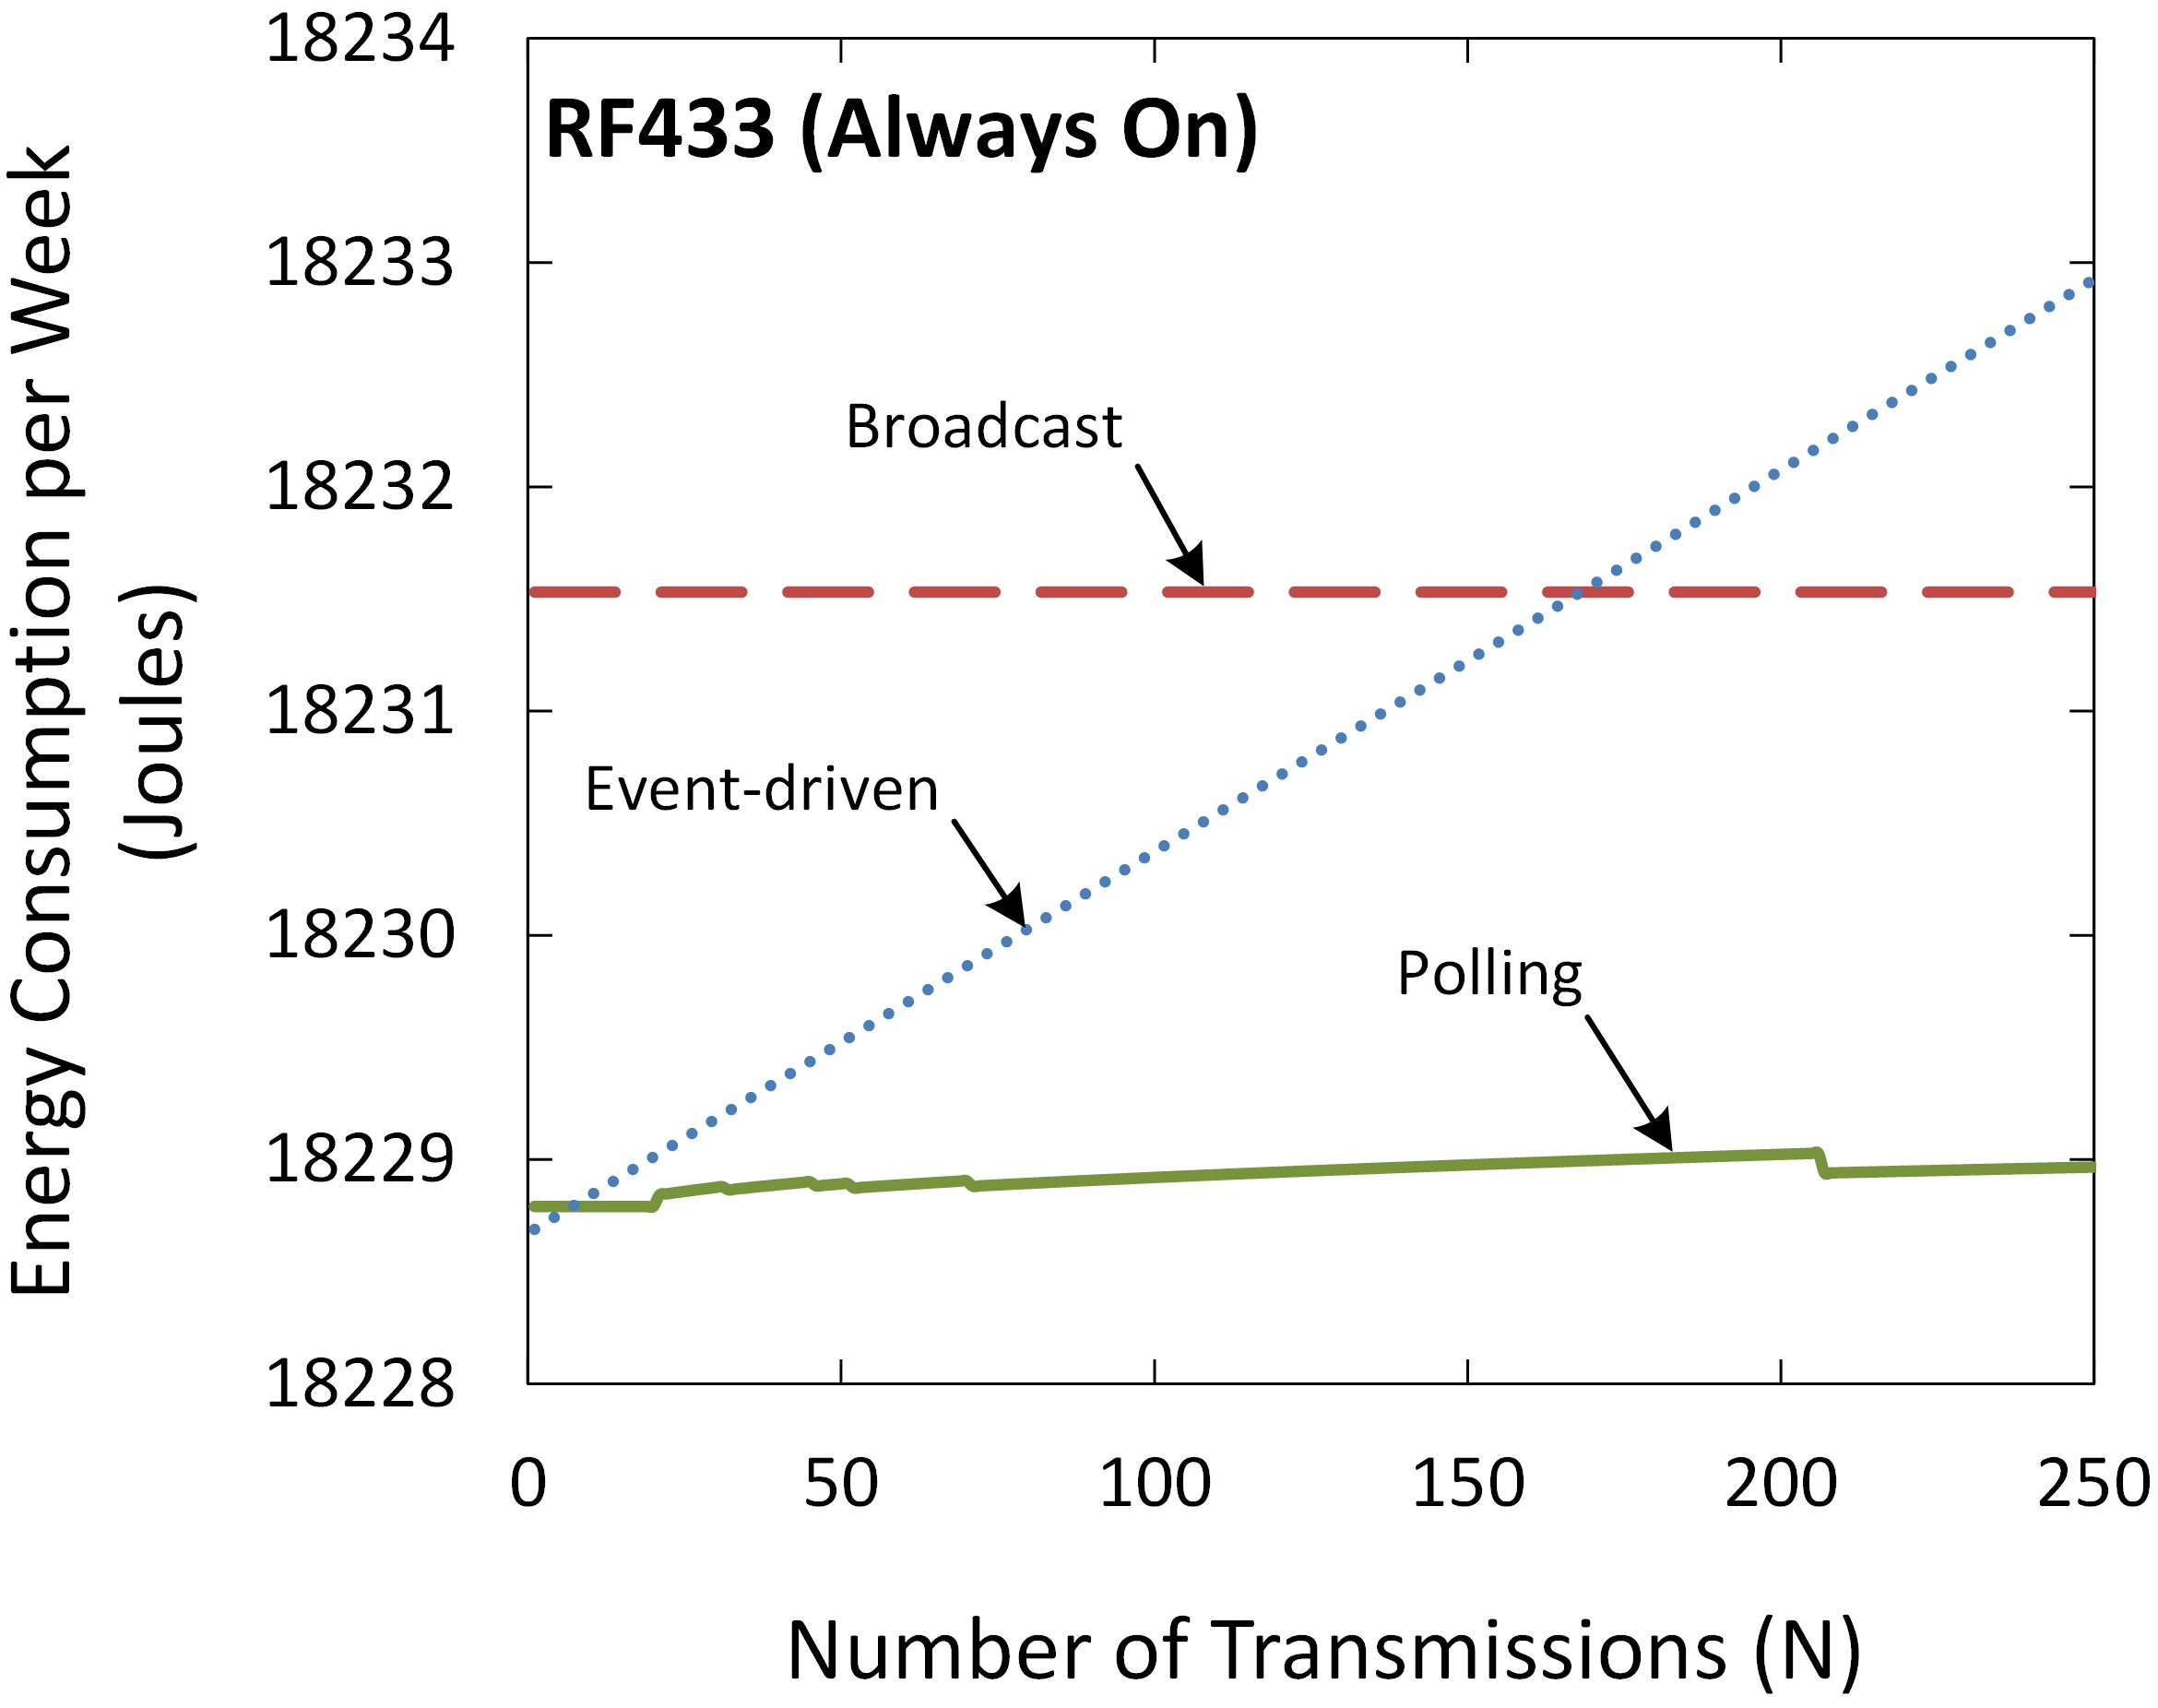 Figure 10. Energy consumption per week of an RF433 interface (Always On).